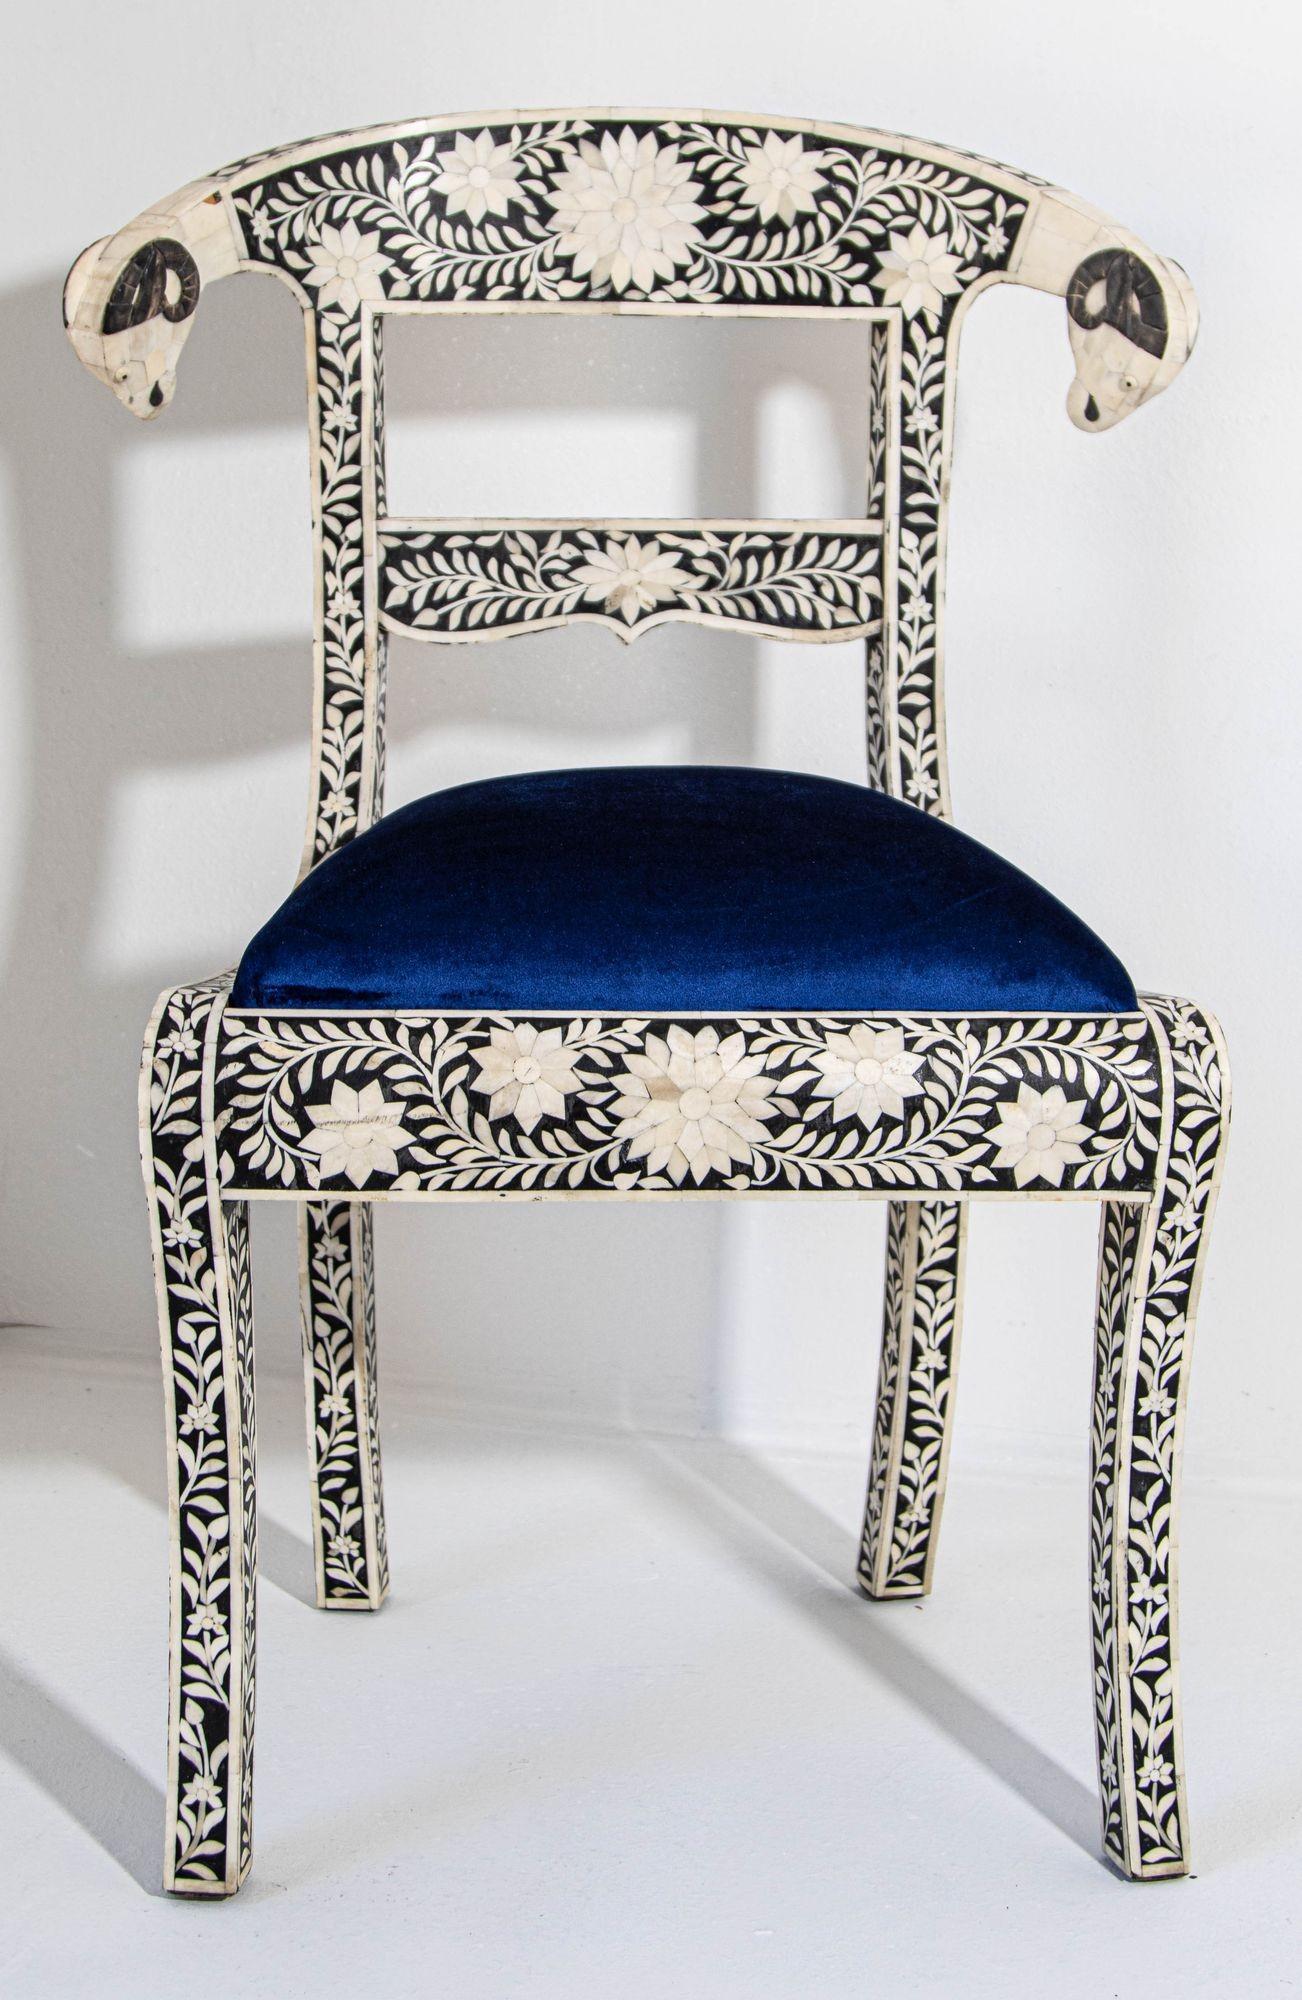 Antique Anglo-Indian Side Chair with Ram's Head Bone Inlaid Royal Blue Seat For Sale 10